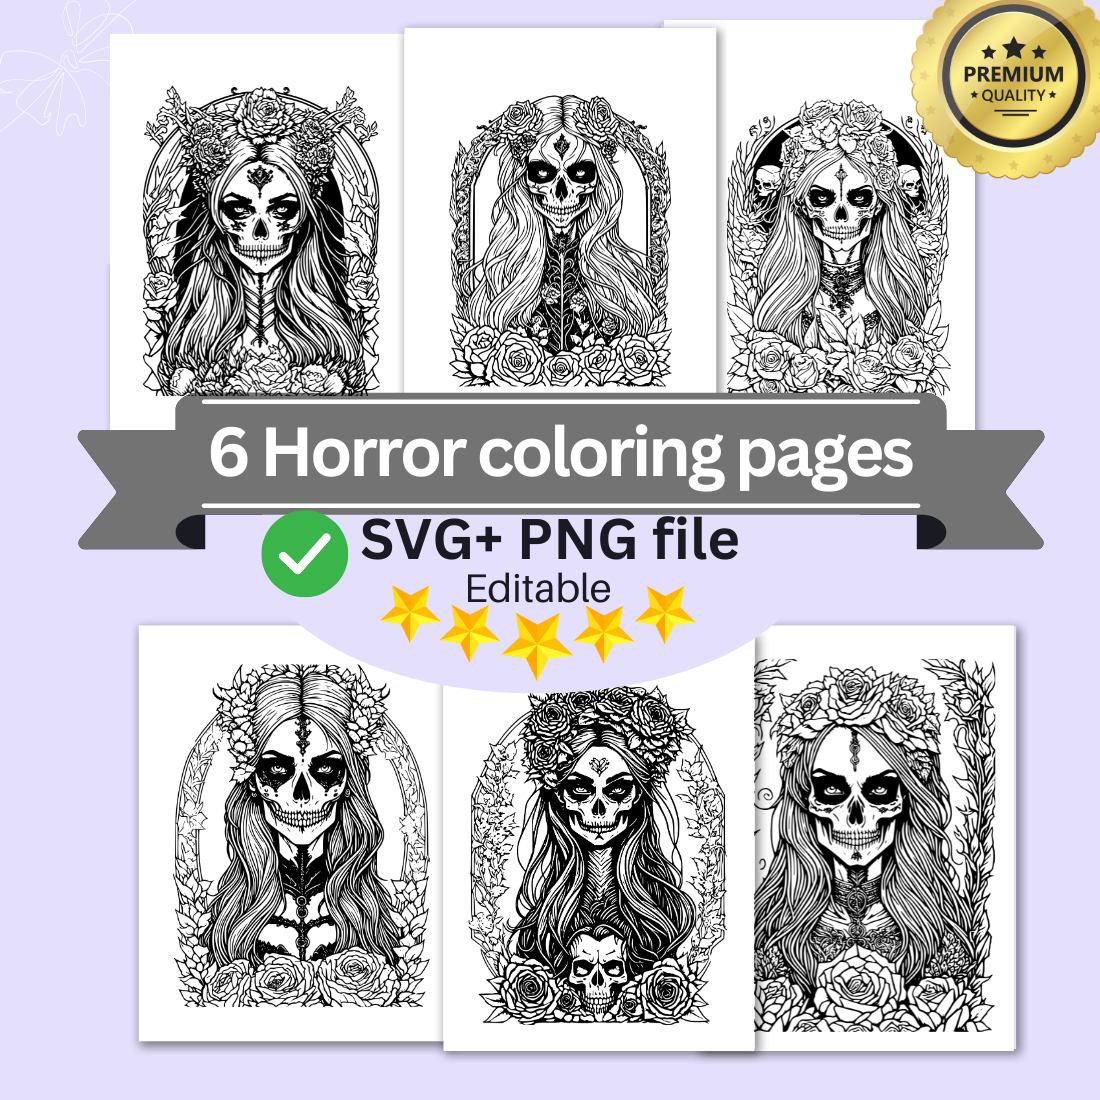 A Gothic girl with a skull and roses headdress horror and creepy, coloring pages bundle for adults cover image.